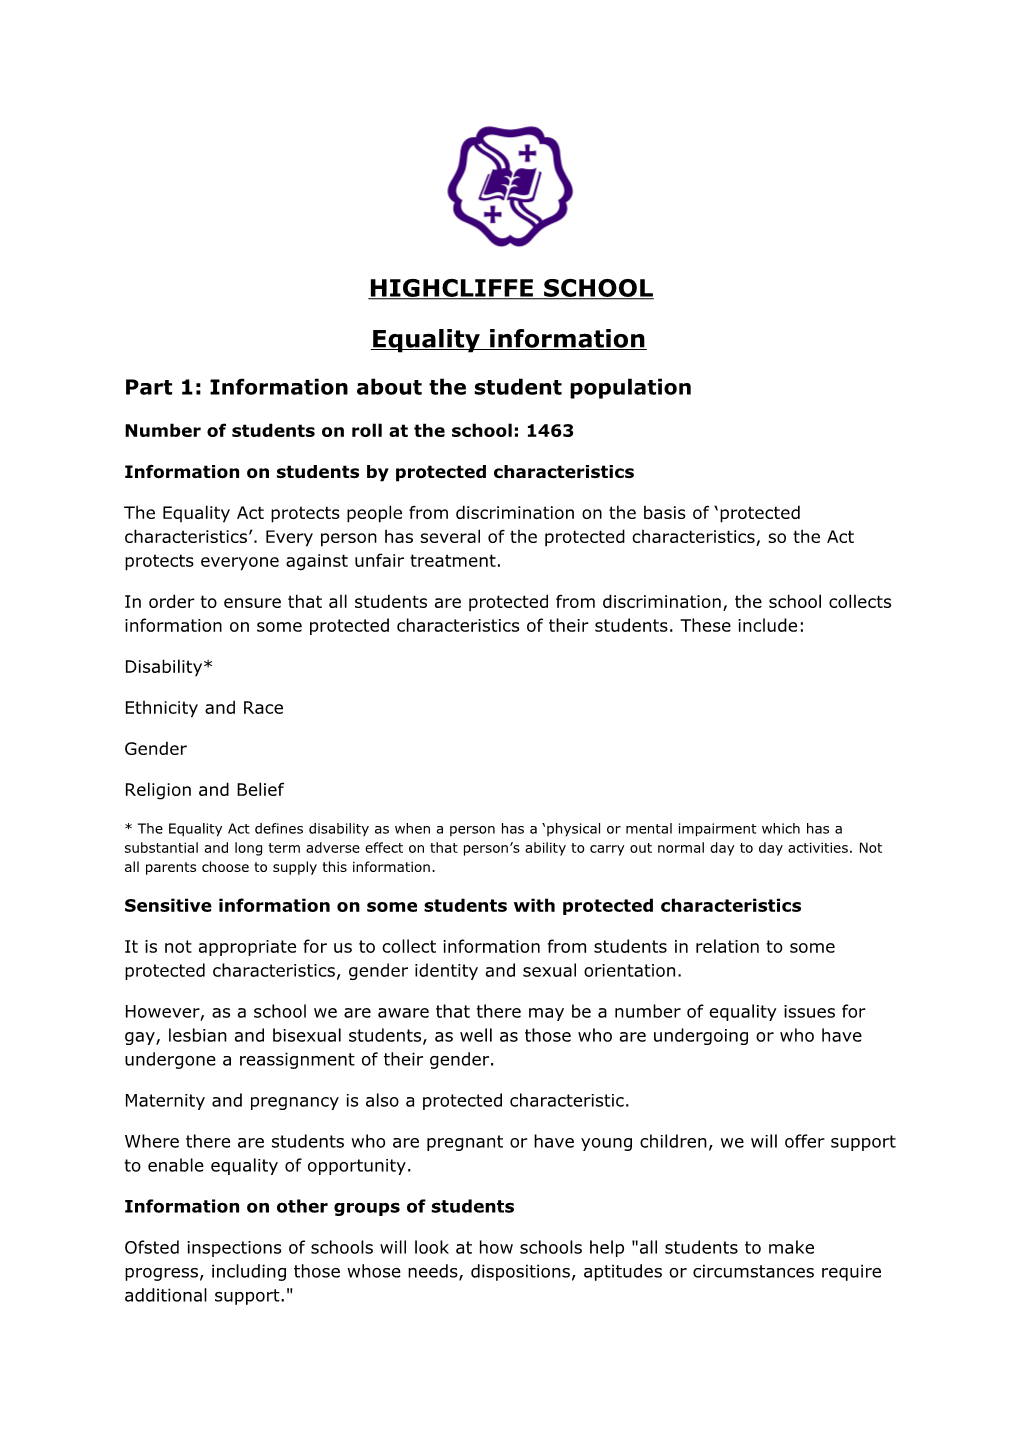 Part 1: Information About the Student Population